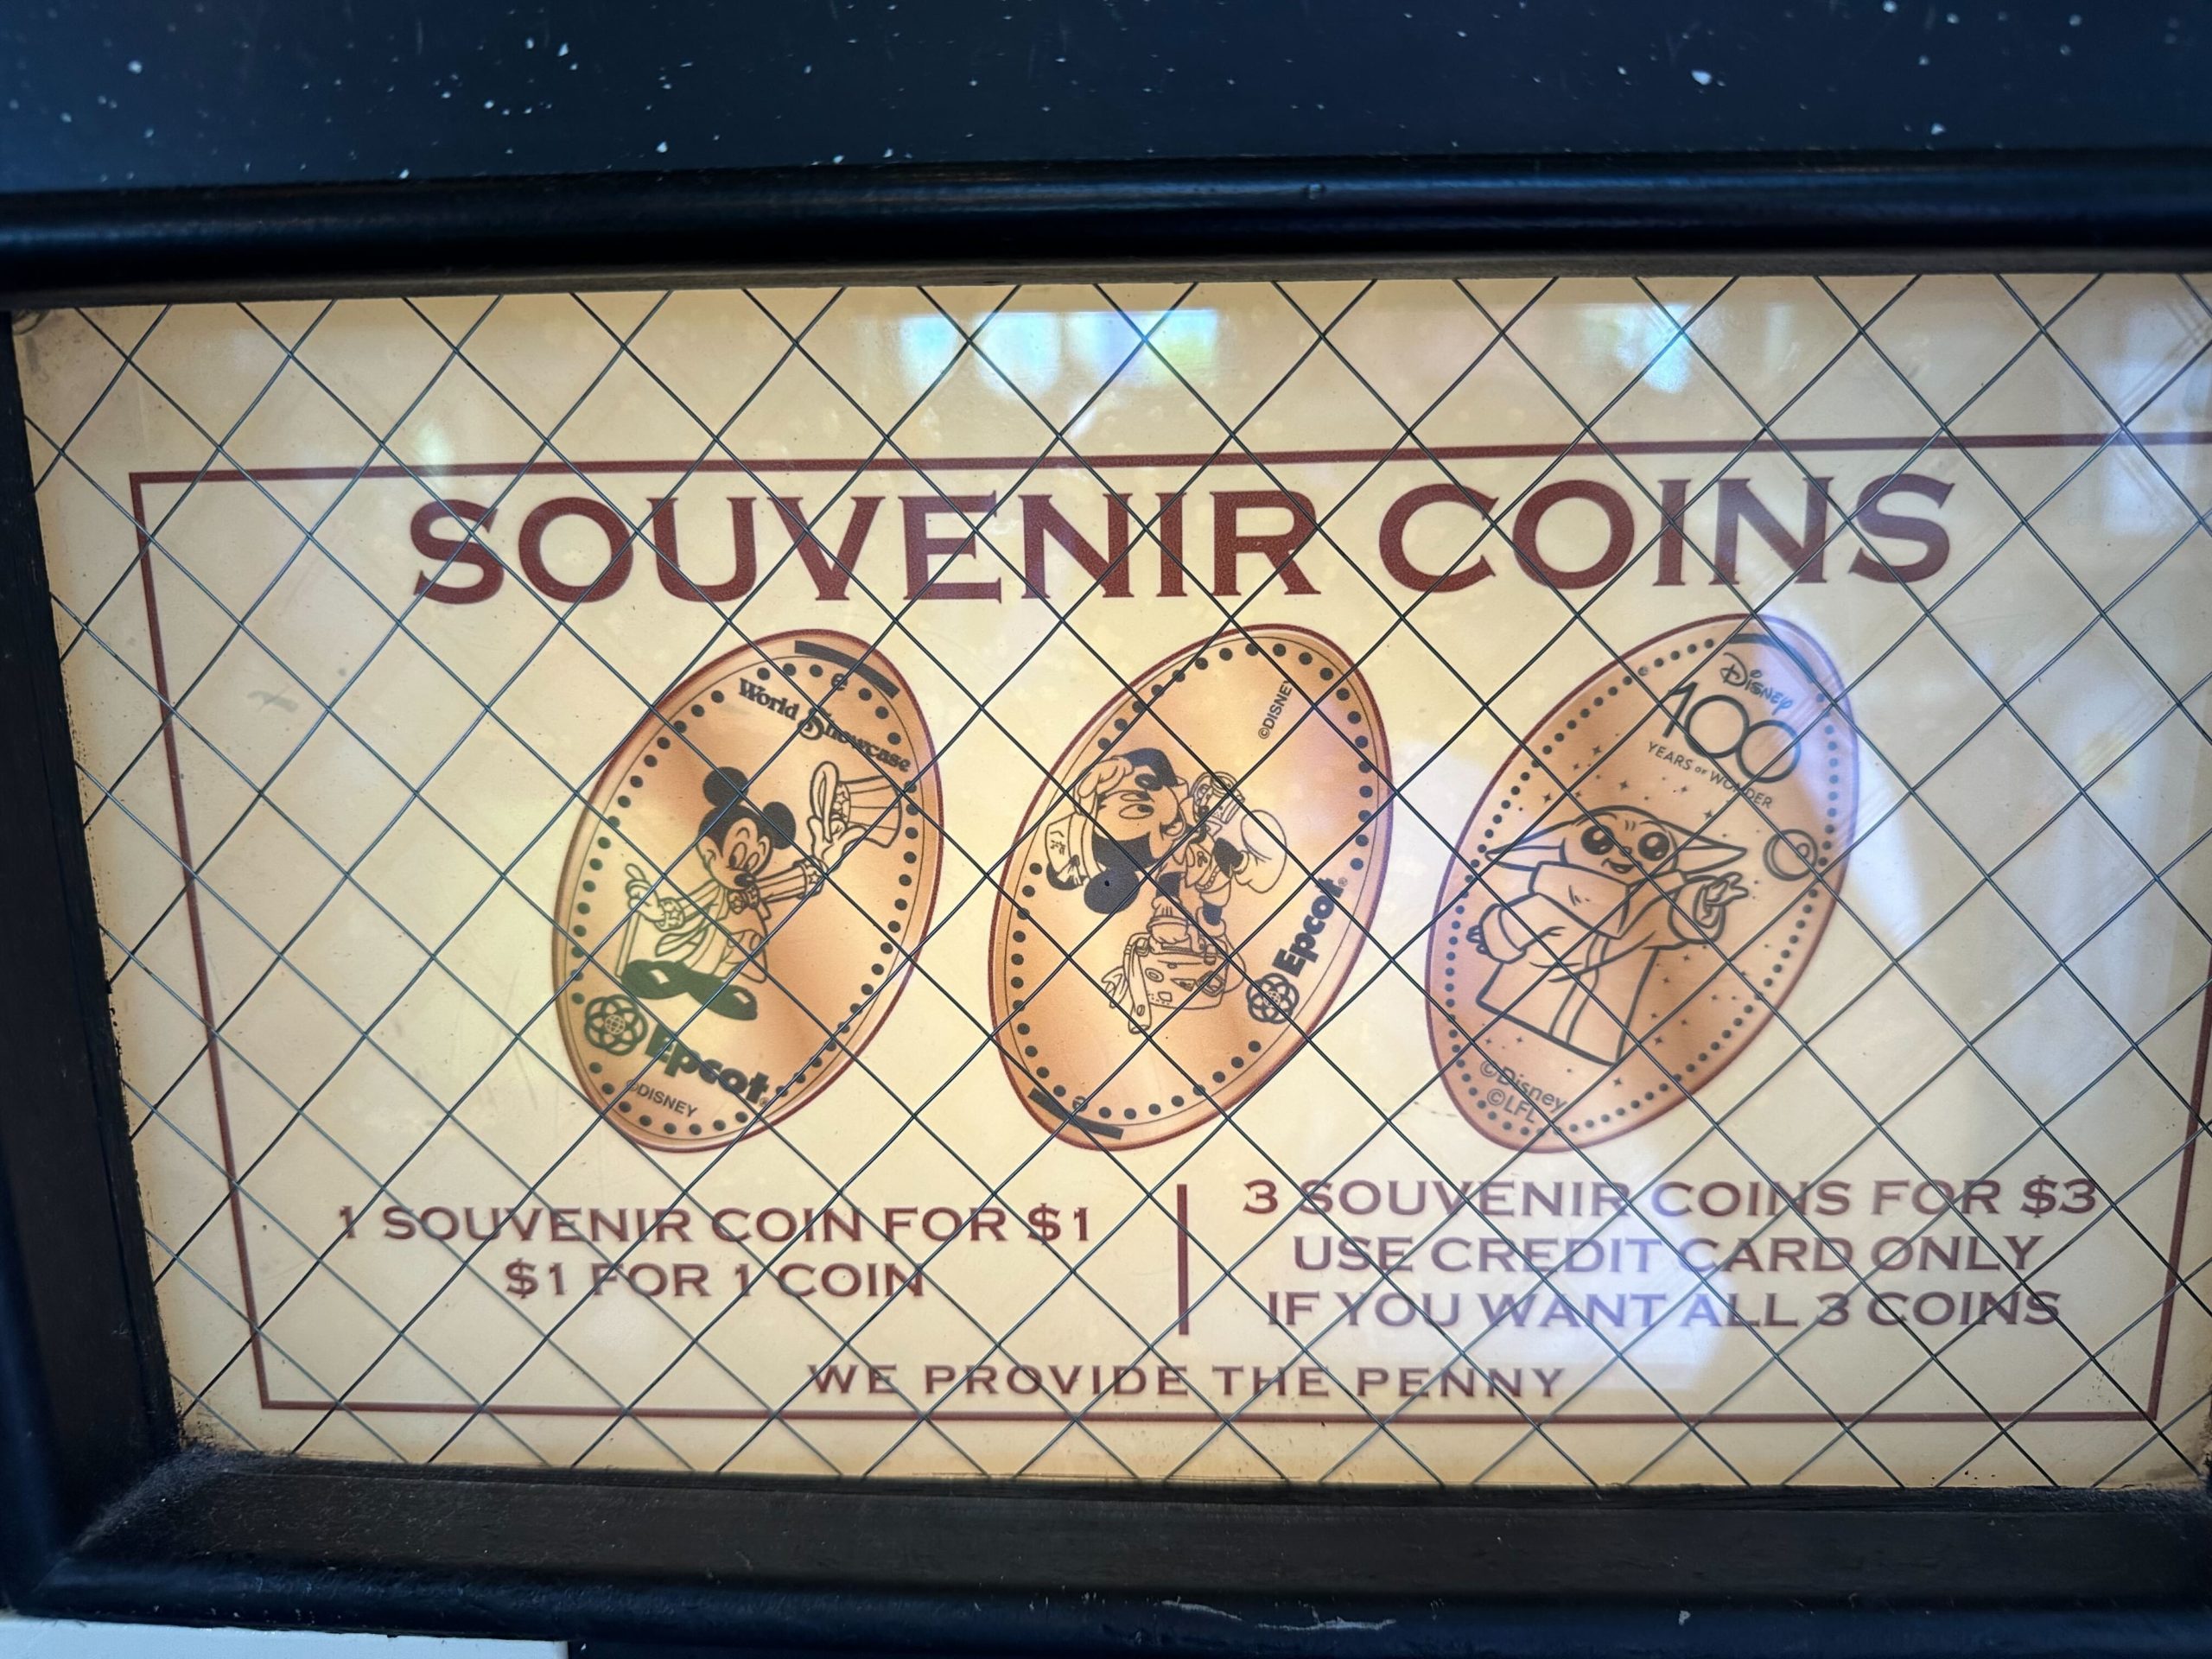 Disney 100 pressed penny at port of entry at Epcot